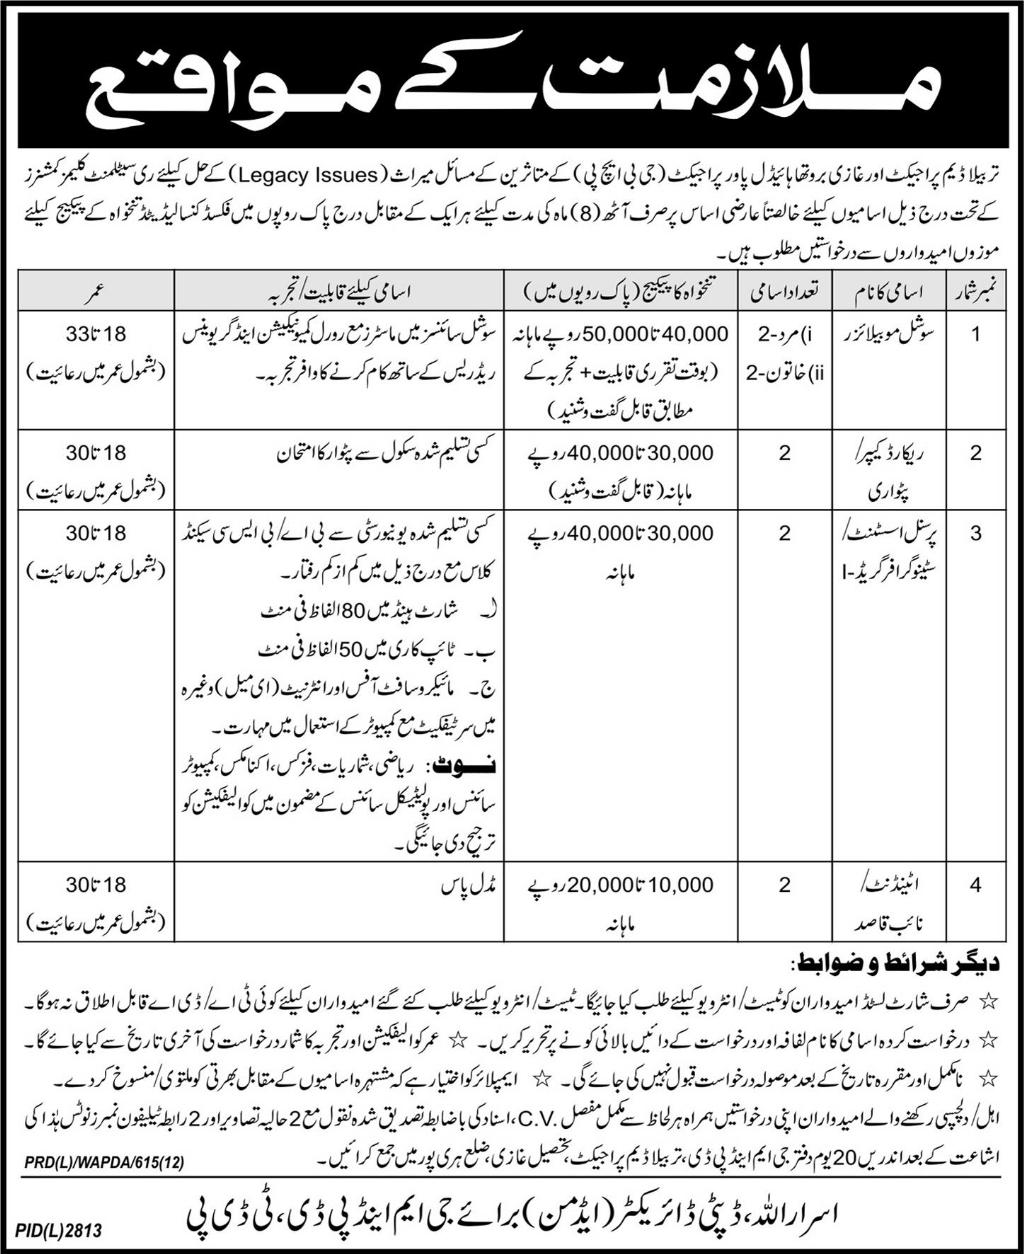 Jobs Opportunity at Ghazi Barotha Hydel Power Project (GBHP)